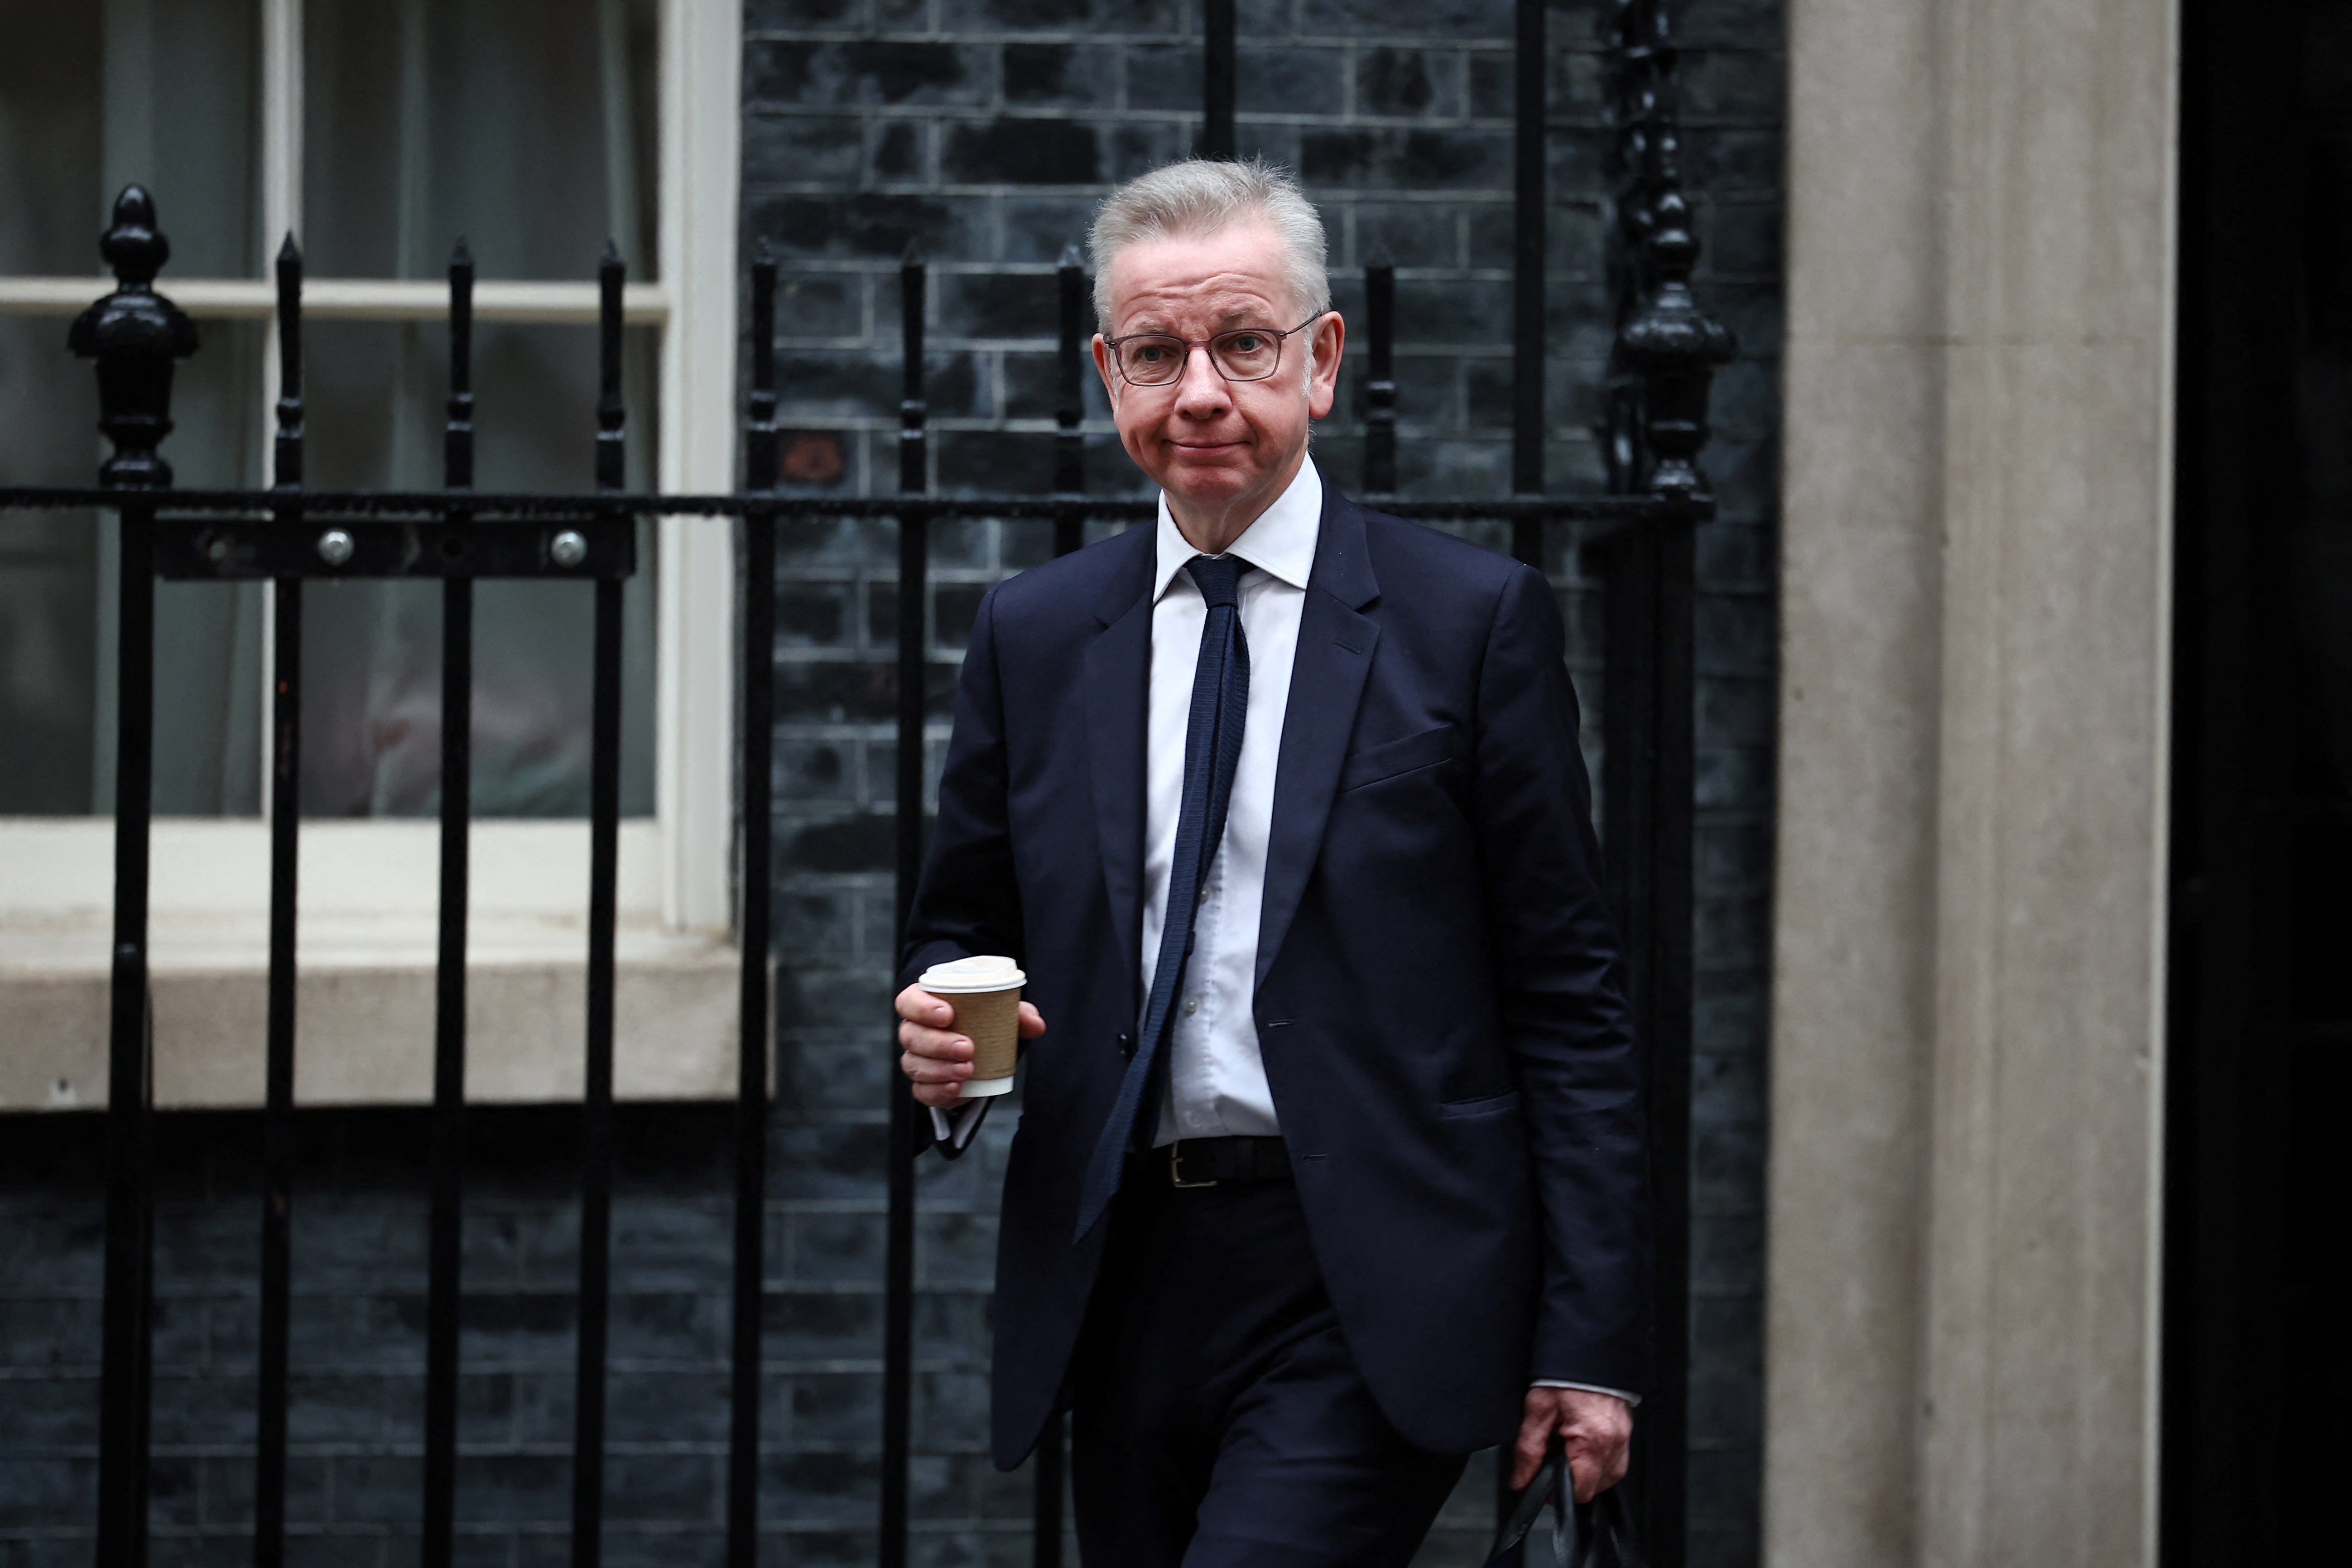 Michael Gove said it was time for a new generation to lead